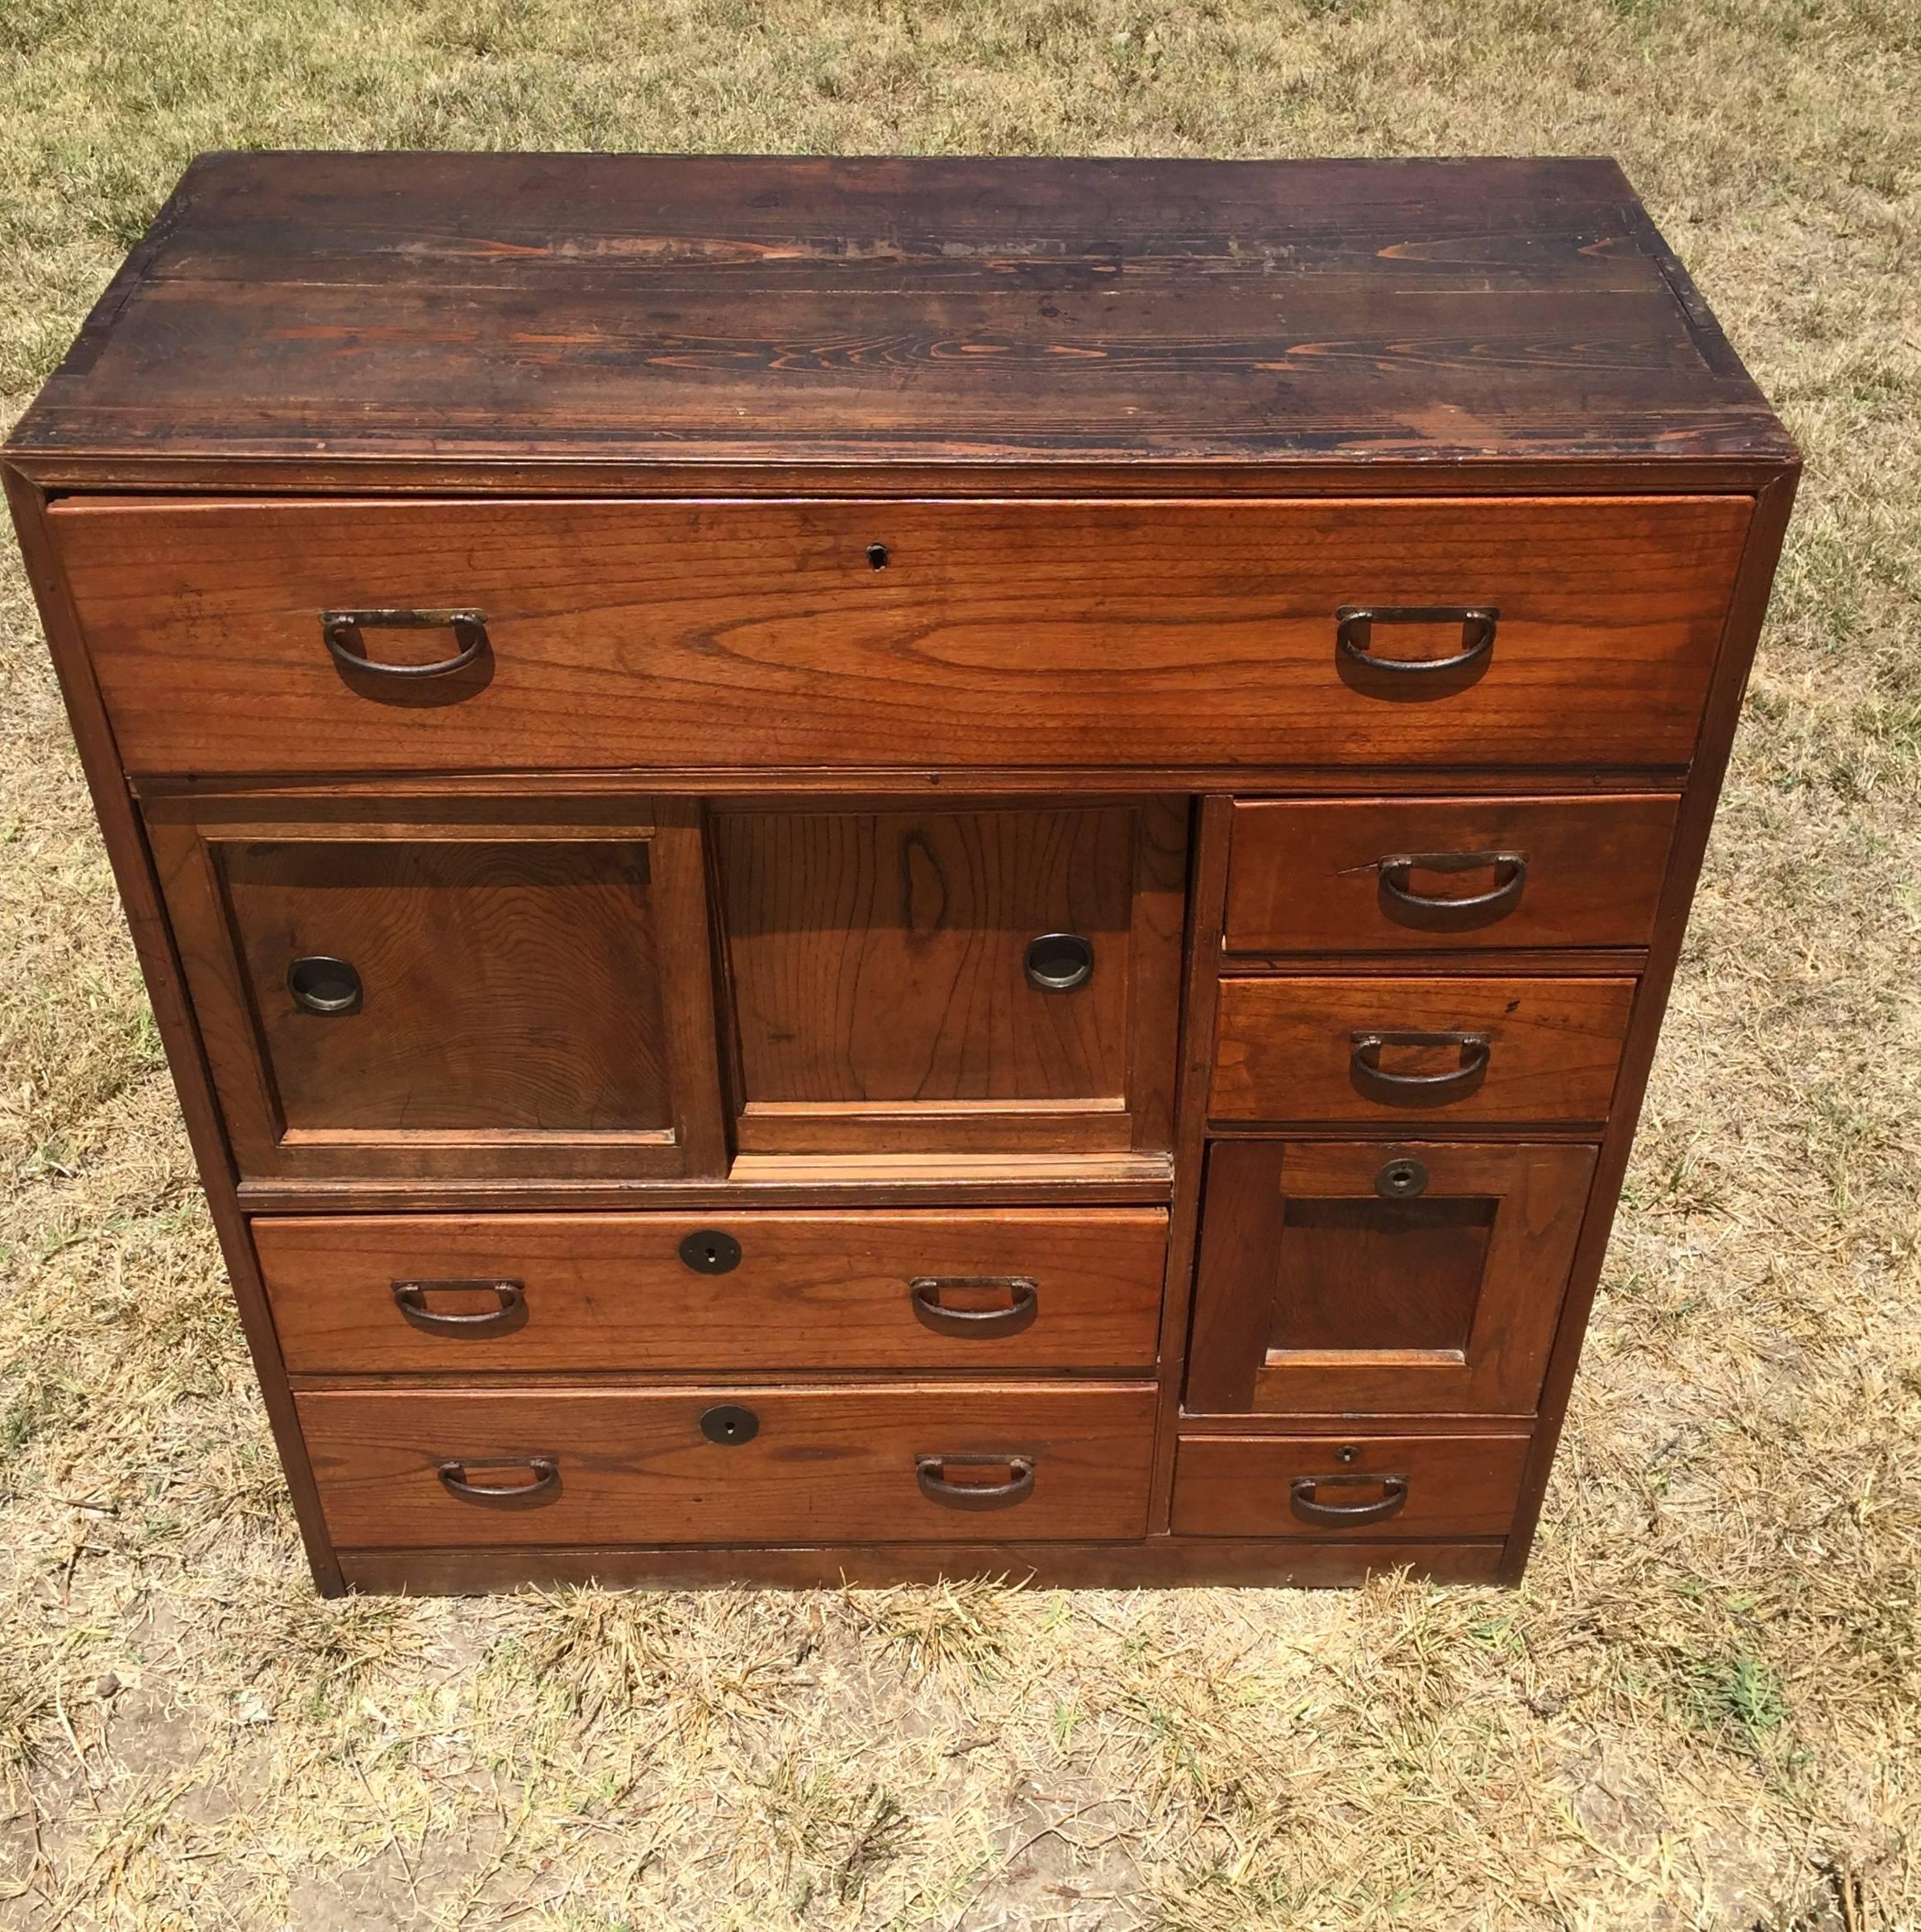 Beautiful vintage Japanese Tansu chest features eight drawers and sliding doors. Two Interior drawers behind a cover. Solid wood have graceful swirling grains. All hardware original to the piece.

A great piece for any interior, especially a